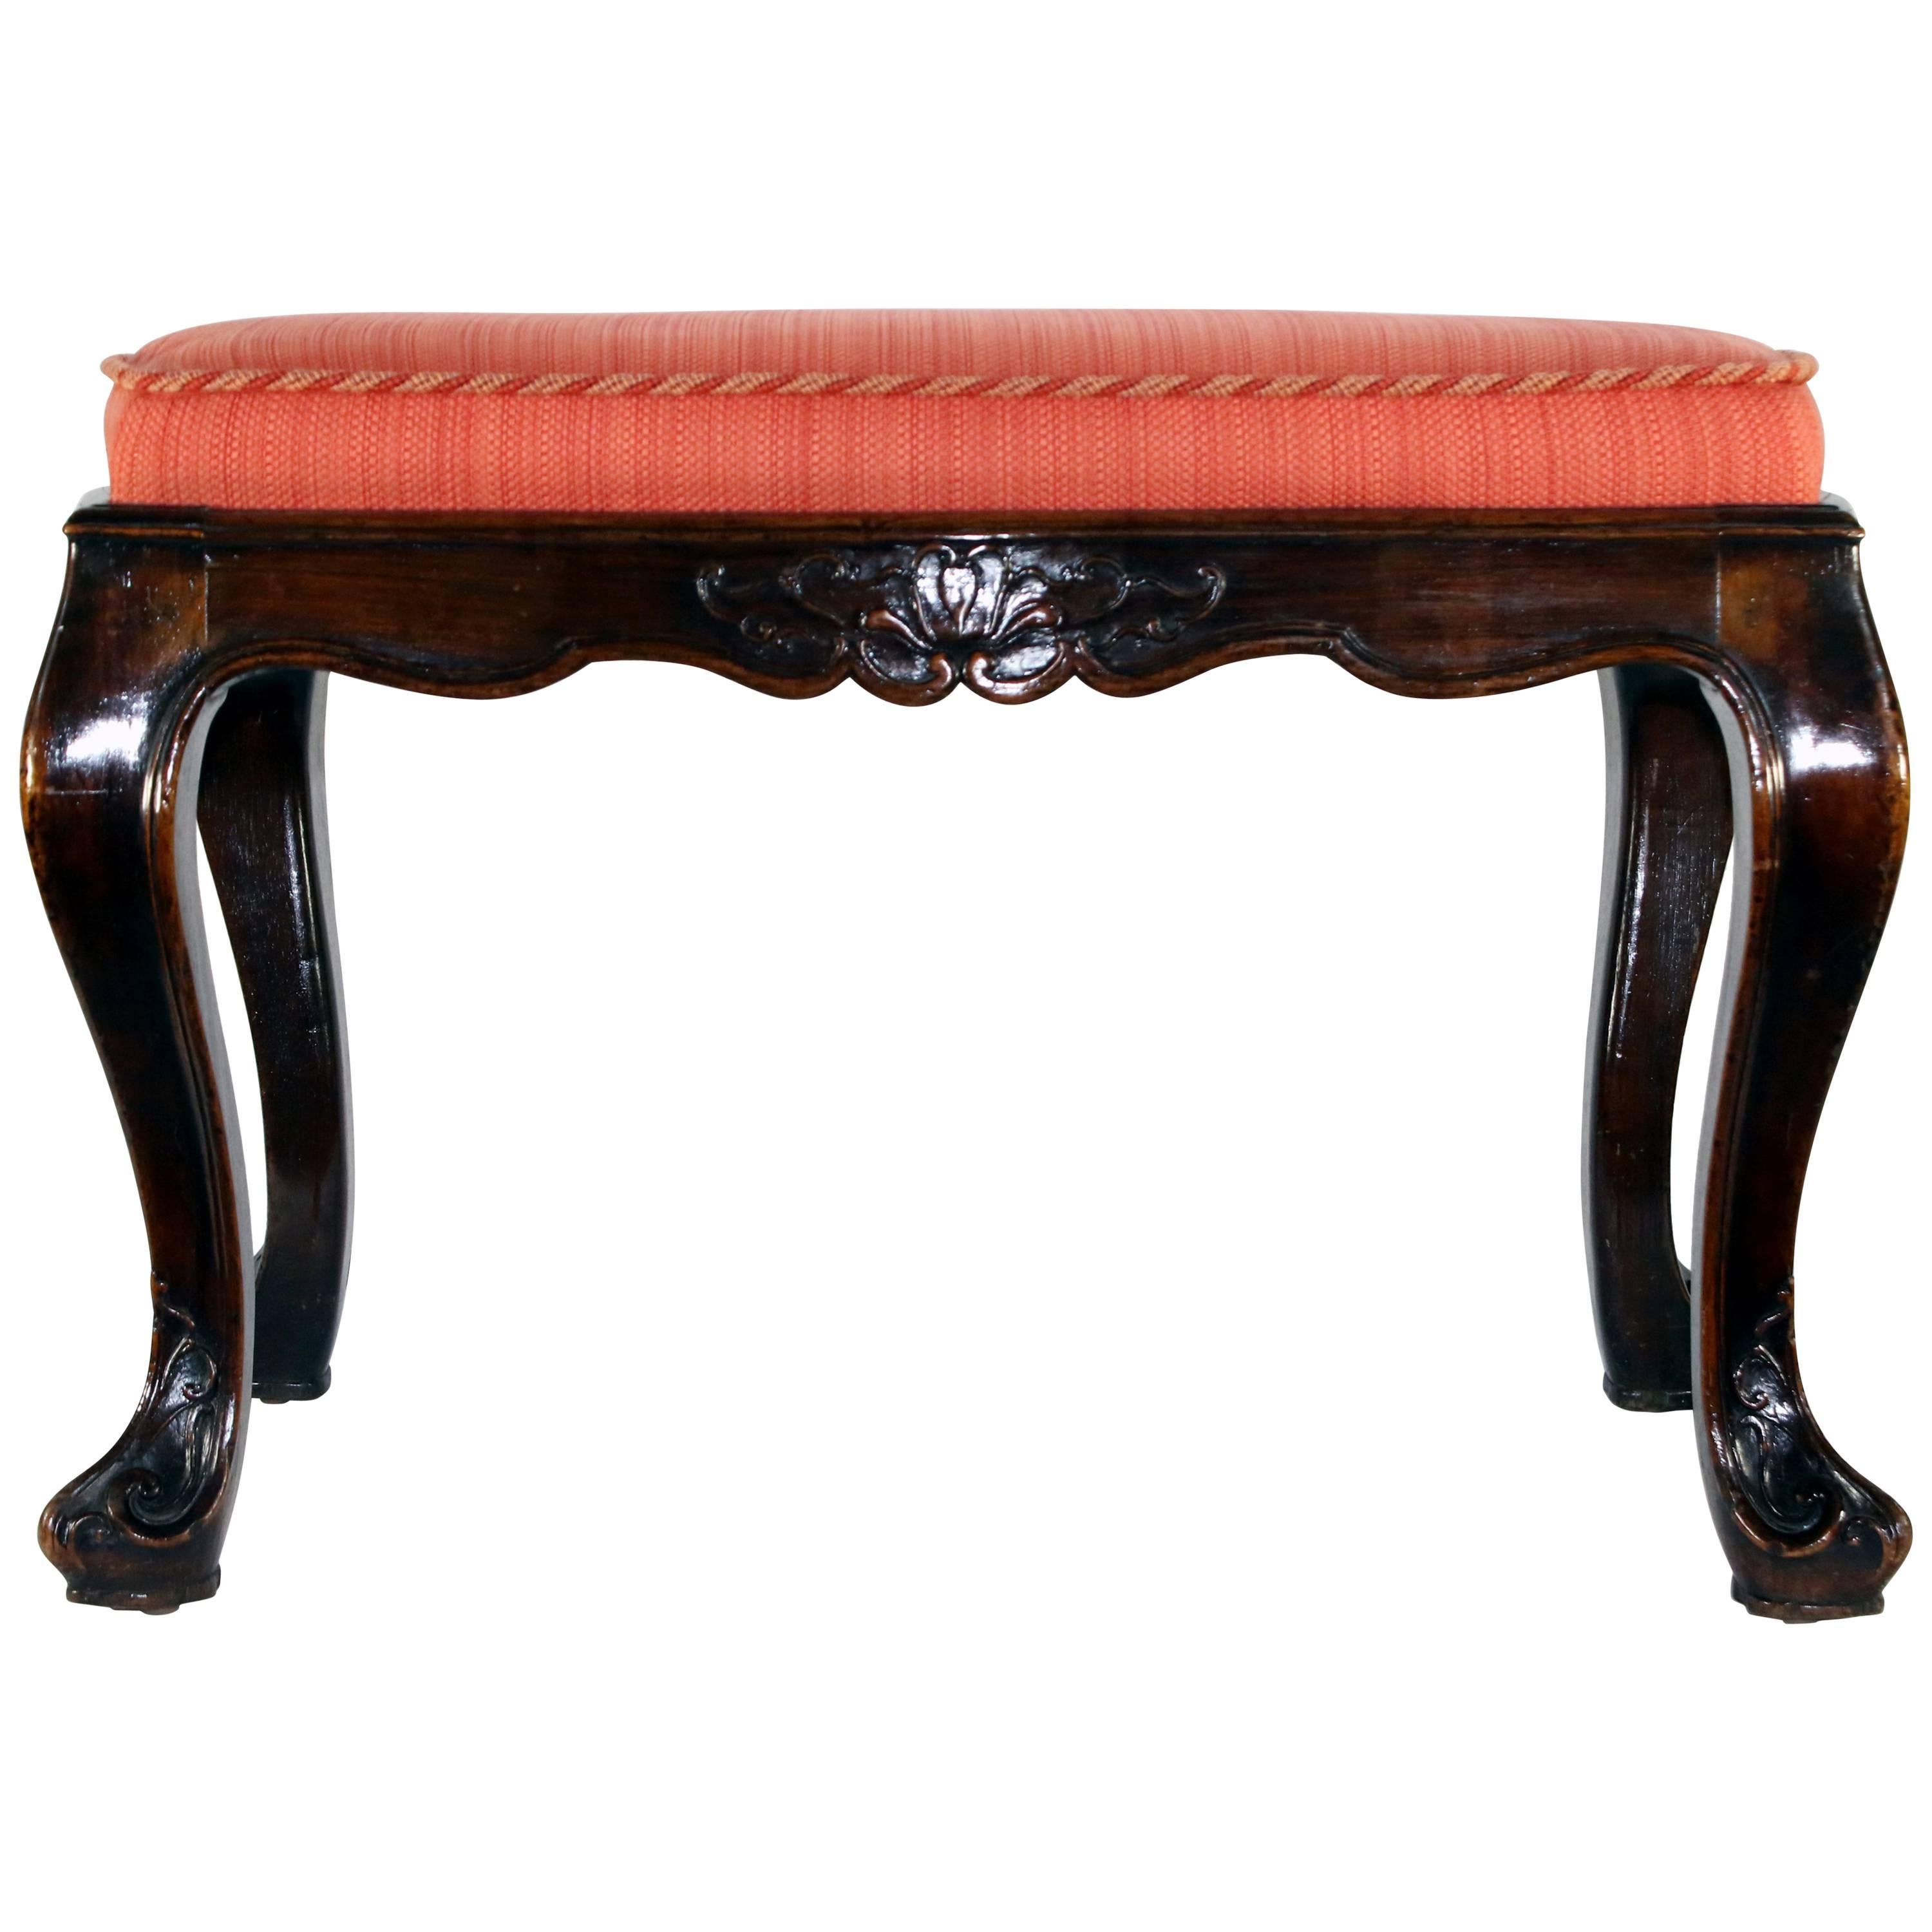 19th Century French Carved Walnut Upholstered Vanity Bench For Sale